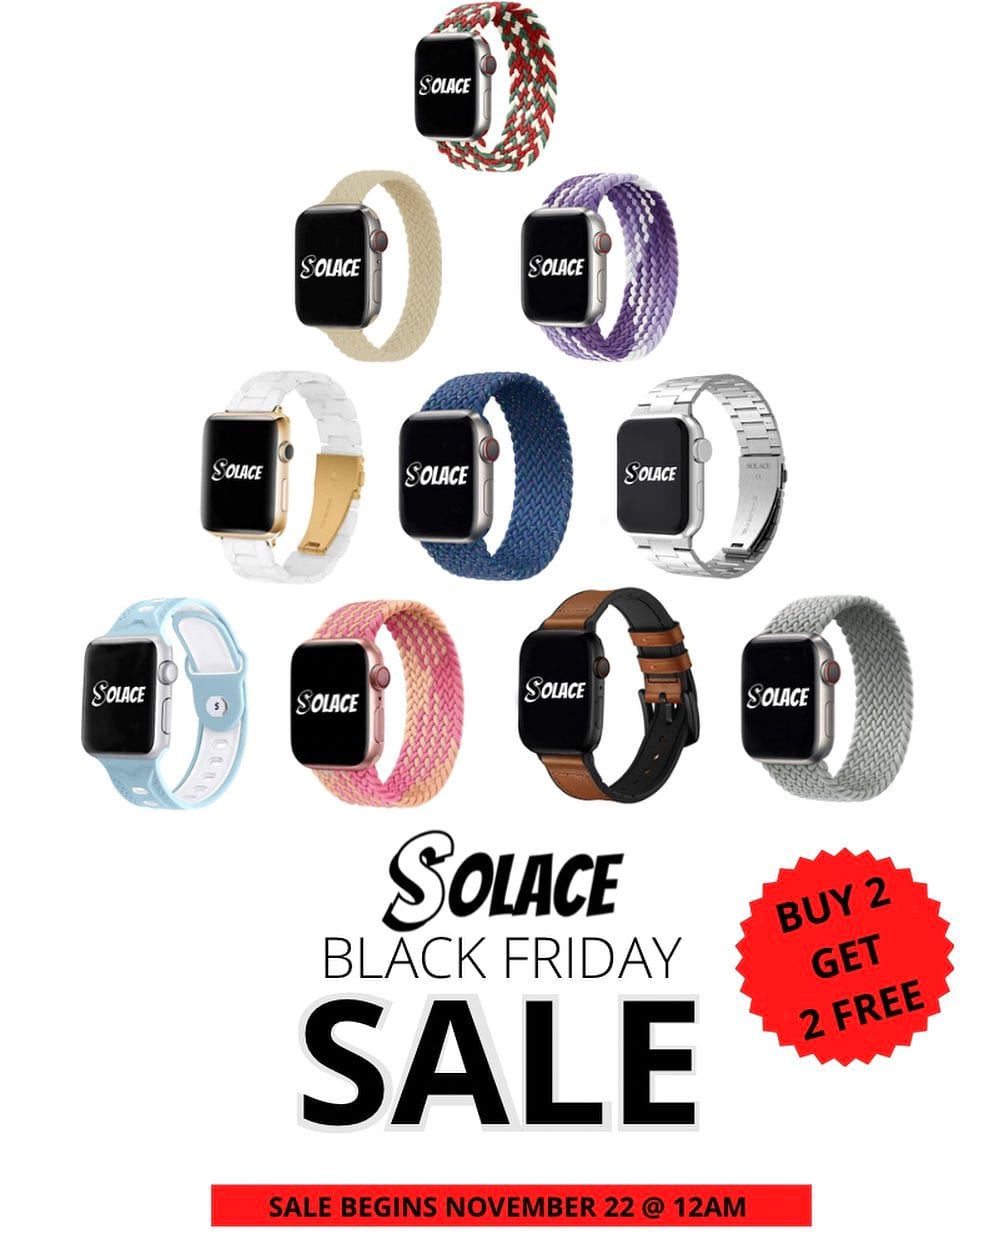 How to use Solace Bands coupons